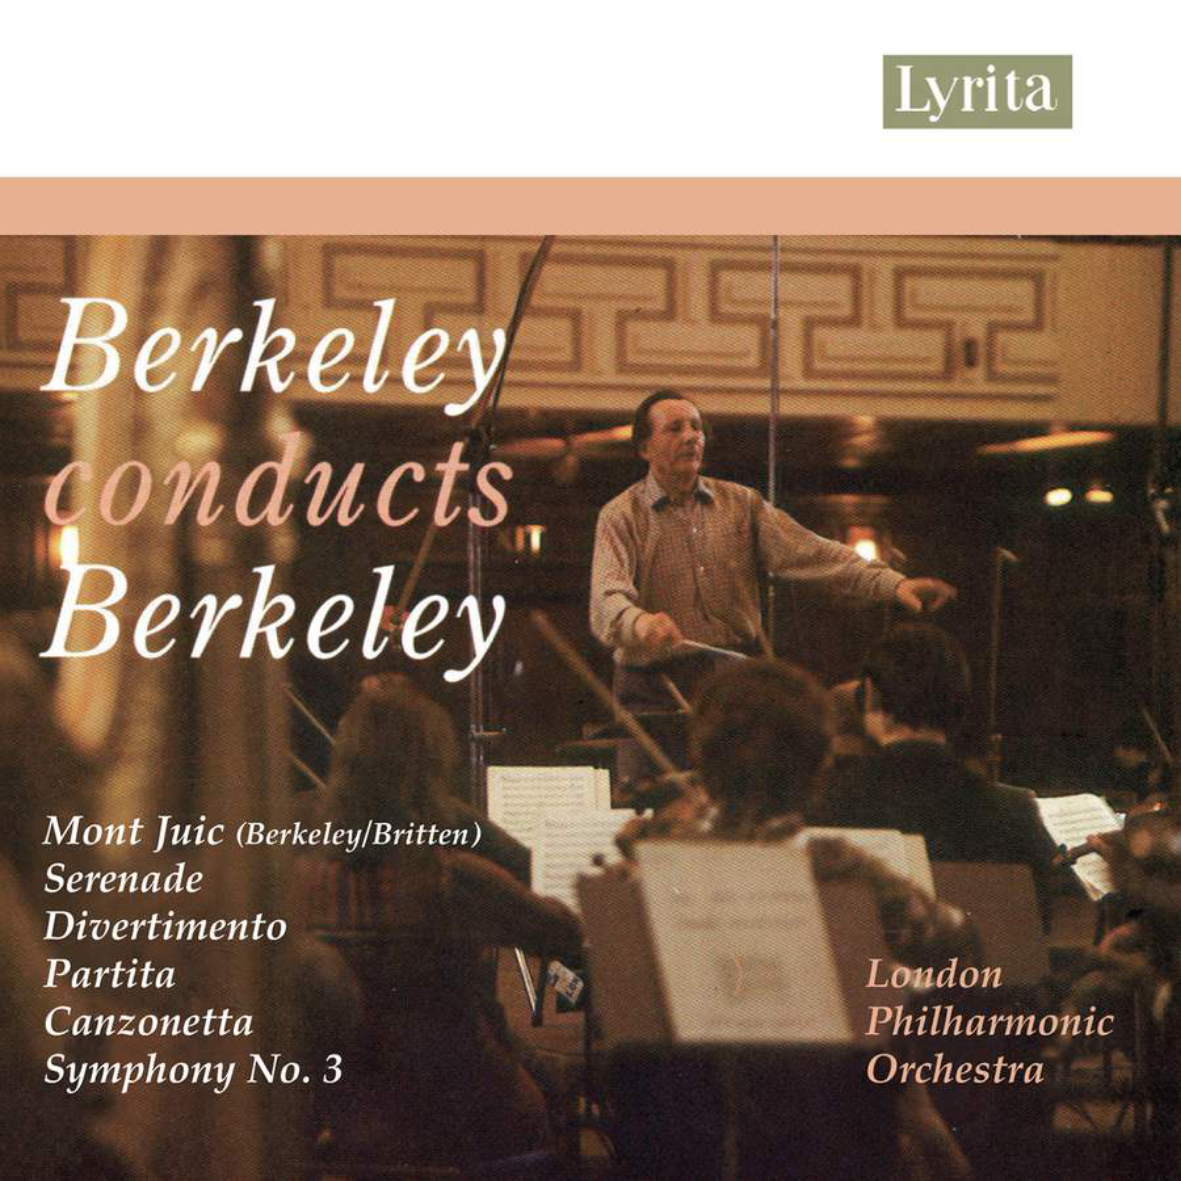 Lyrita’s 1973 recording of Berkeley conducting his own music with the LPO